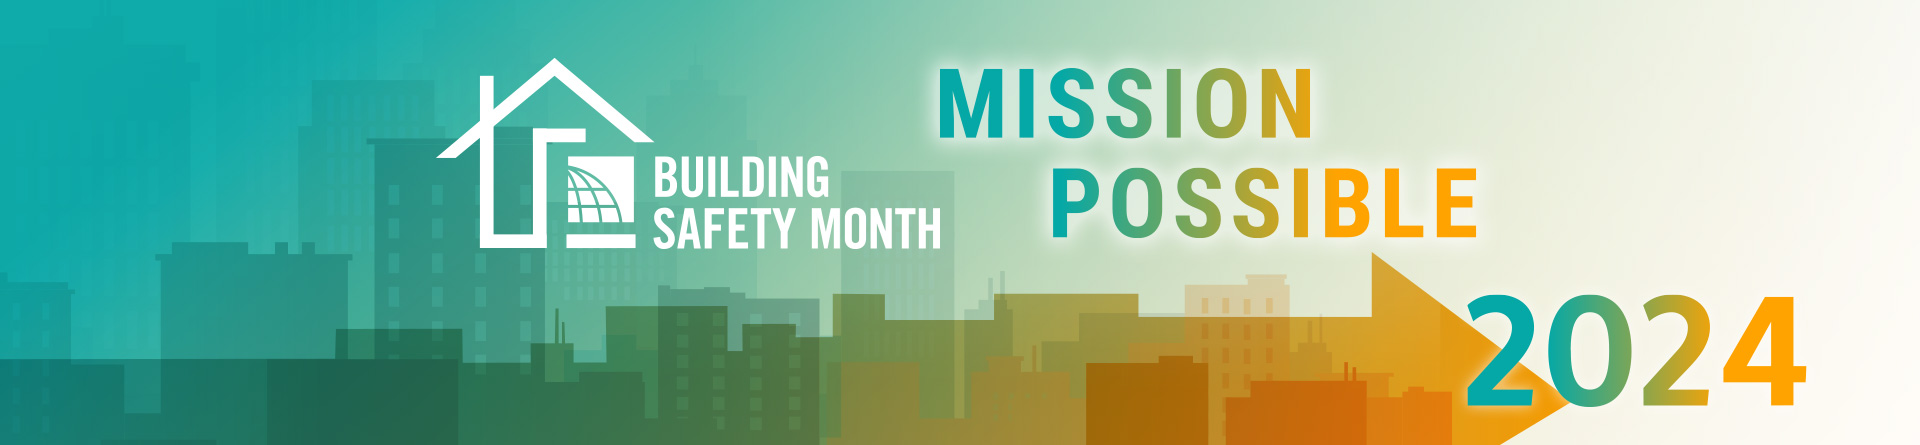 Building Safety Month Sponsors